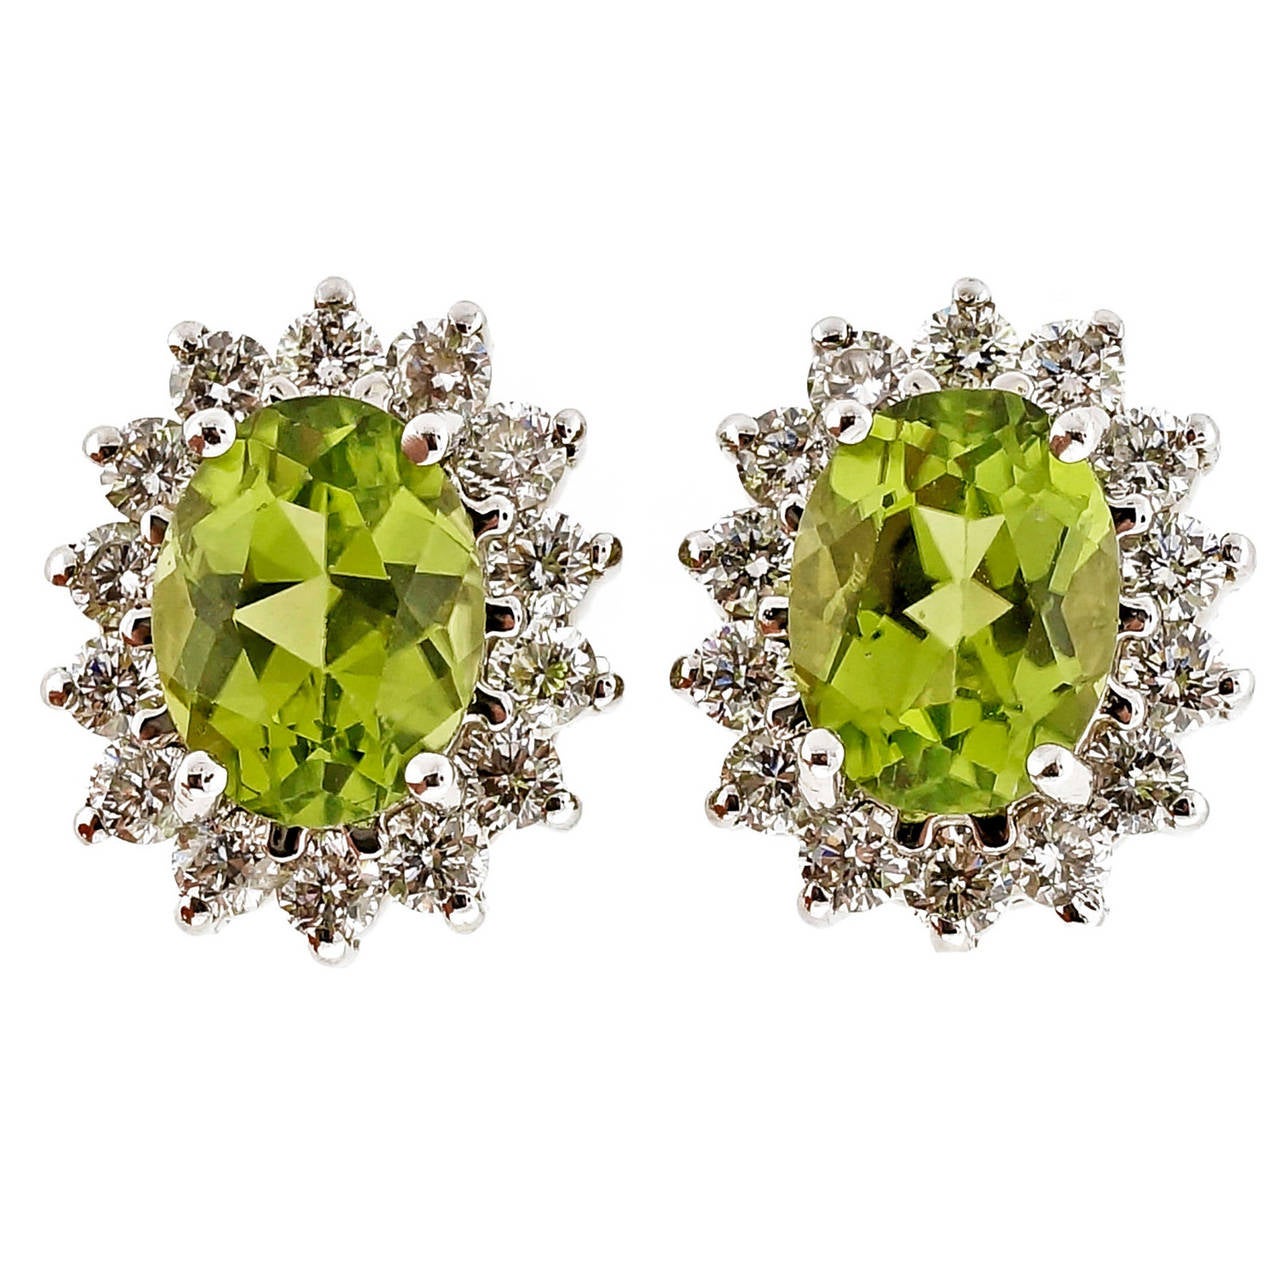 Oval Peridot and diamond halo stud earrings. 2 bright green Peridots accented by round, well cut diamonds.  Circa 1960 -1970.

2 oval bright green Peridot, approx. total weight 2.75cts, 7.90 x 6.10 x 3.81mm
28 round diamonds, approx. total weight